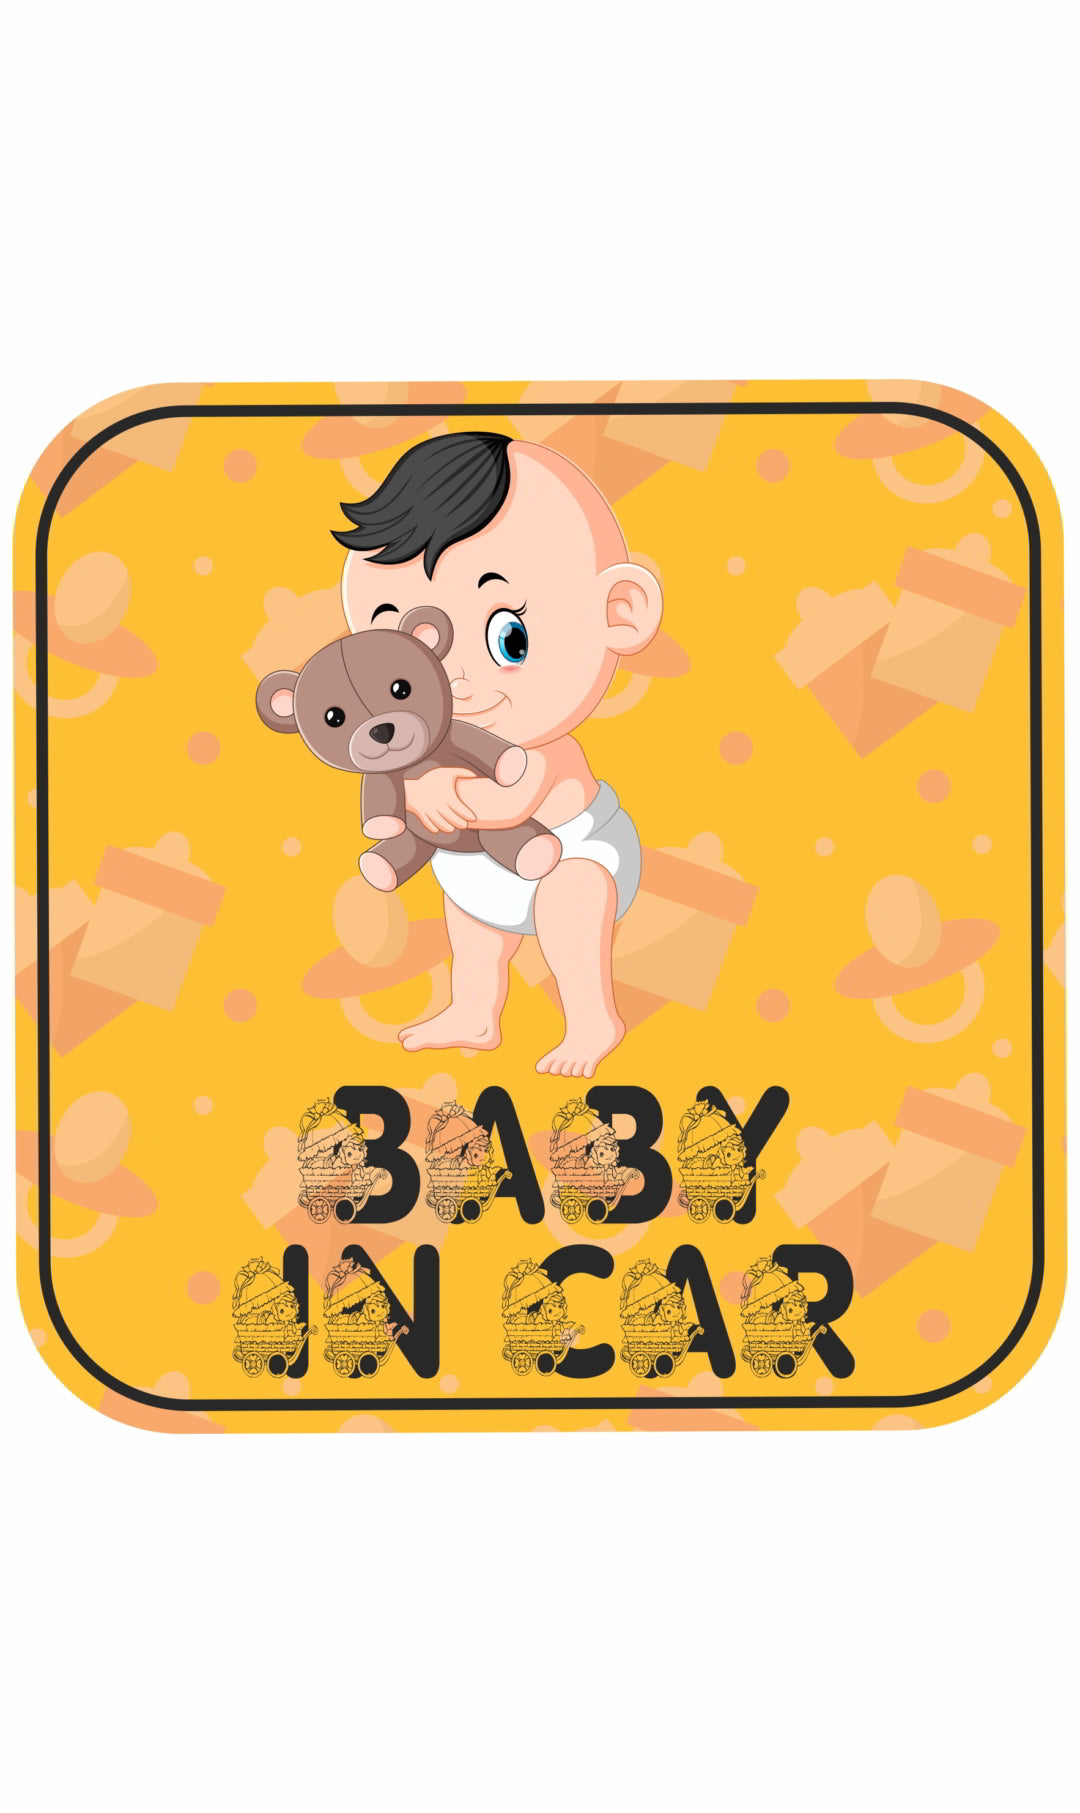 BABY IN CAR Decal Sticker(2pc)_c23